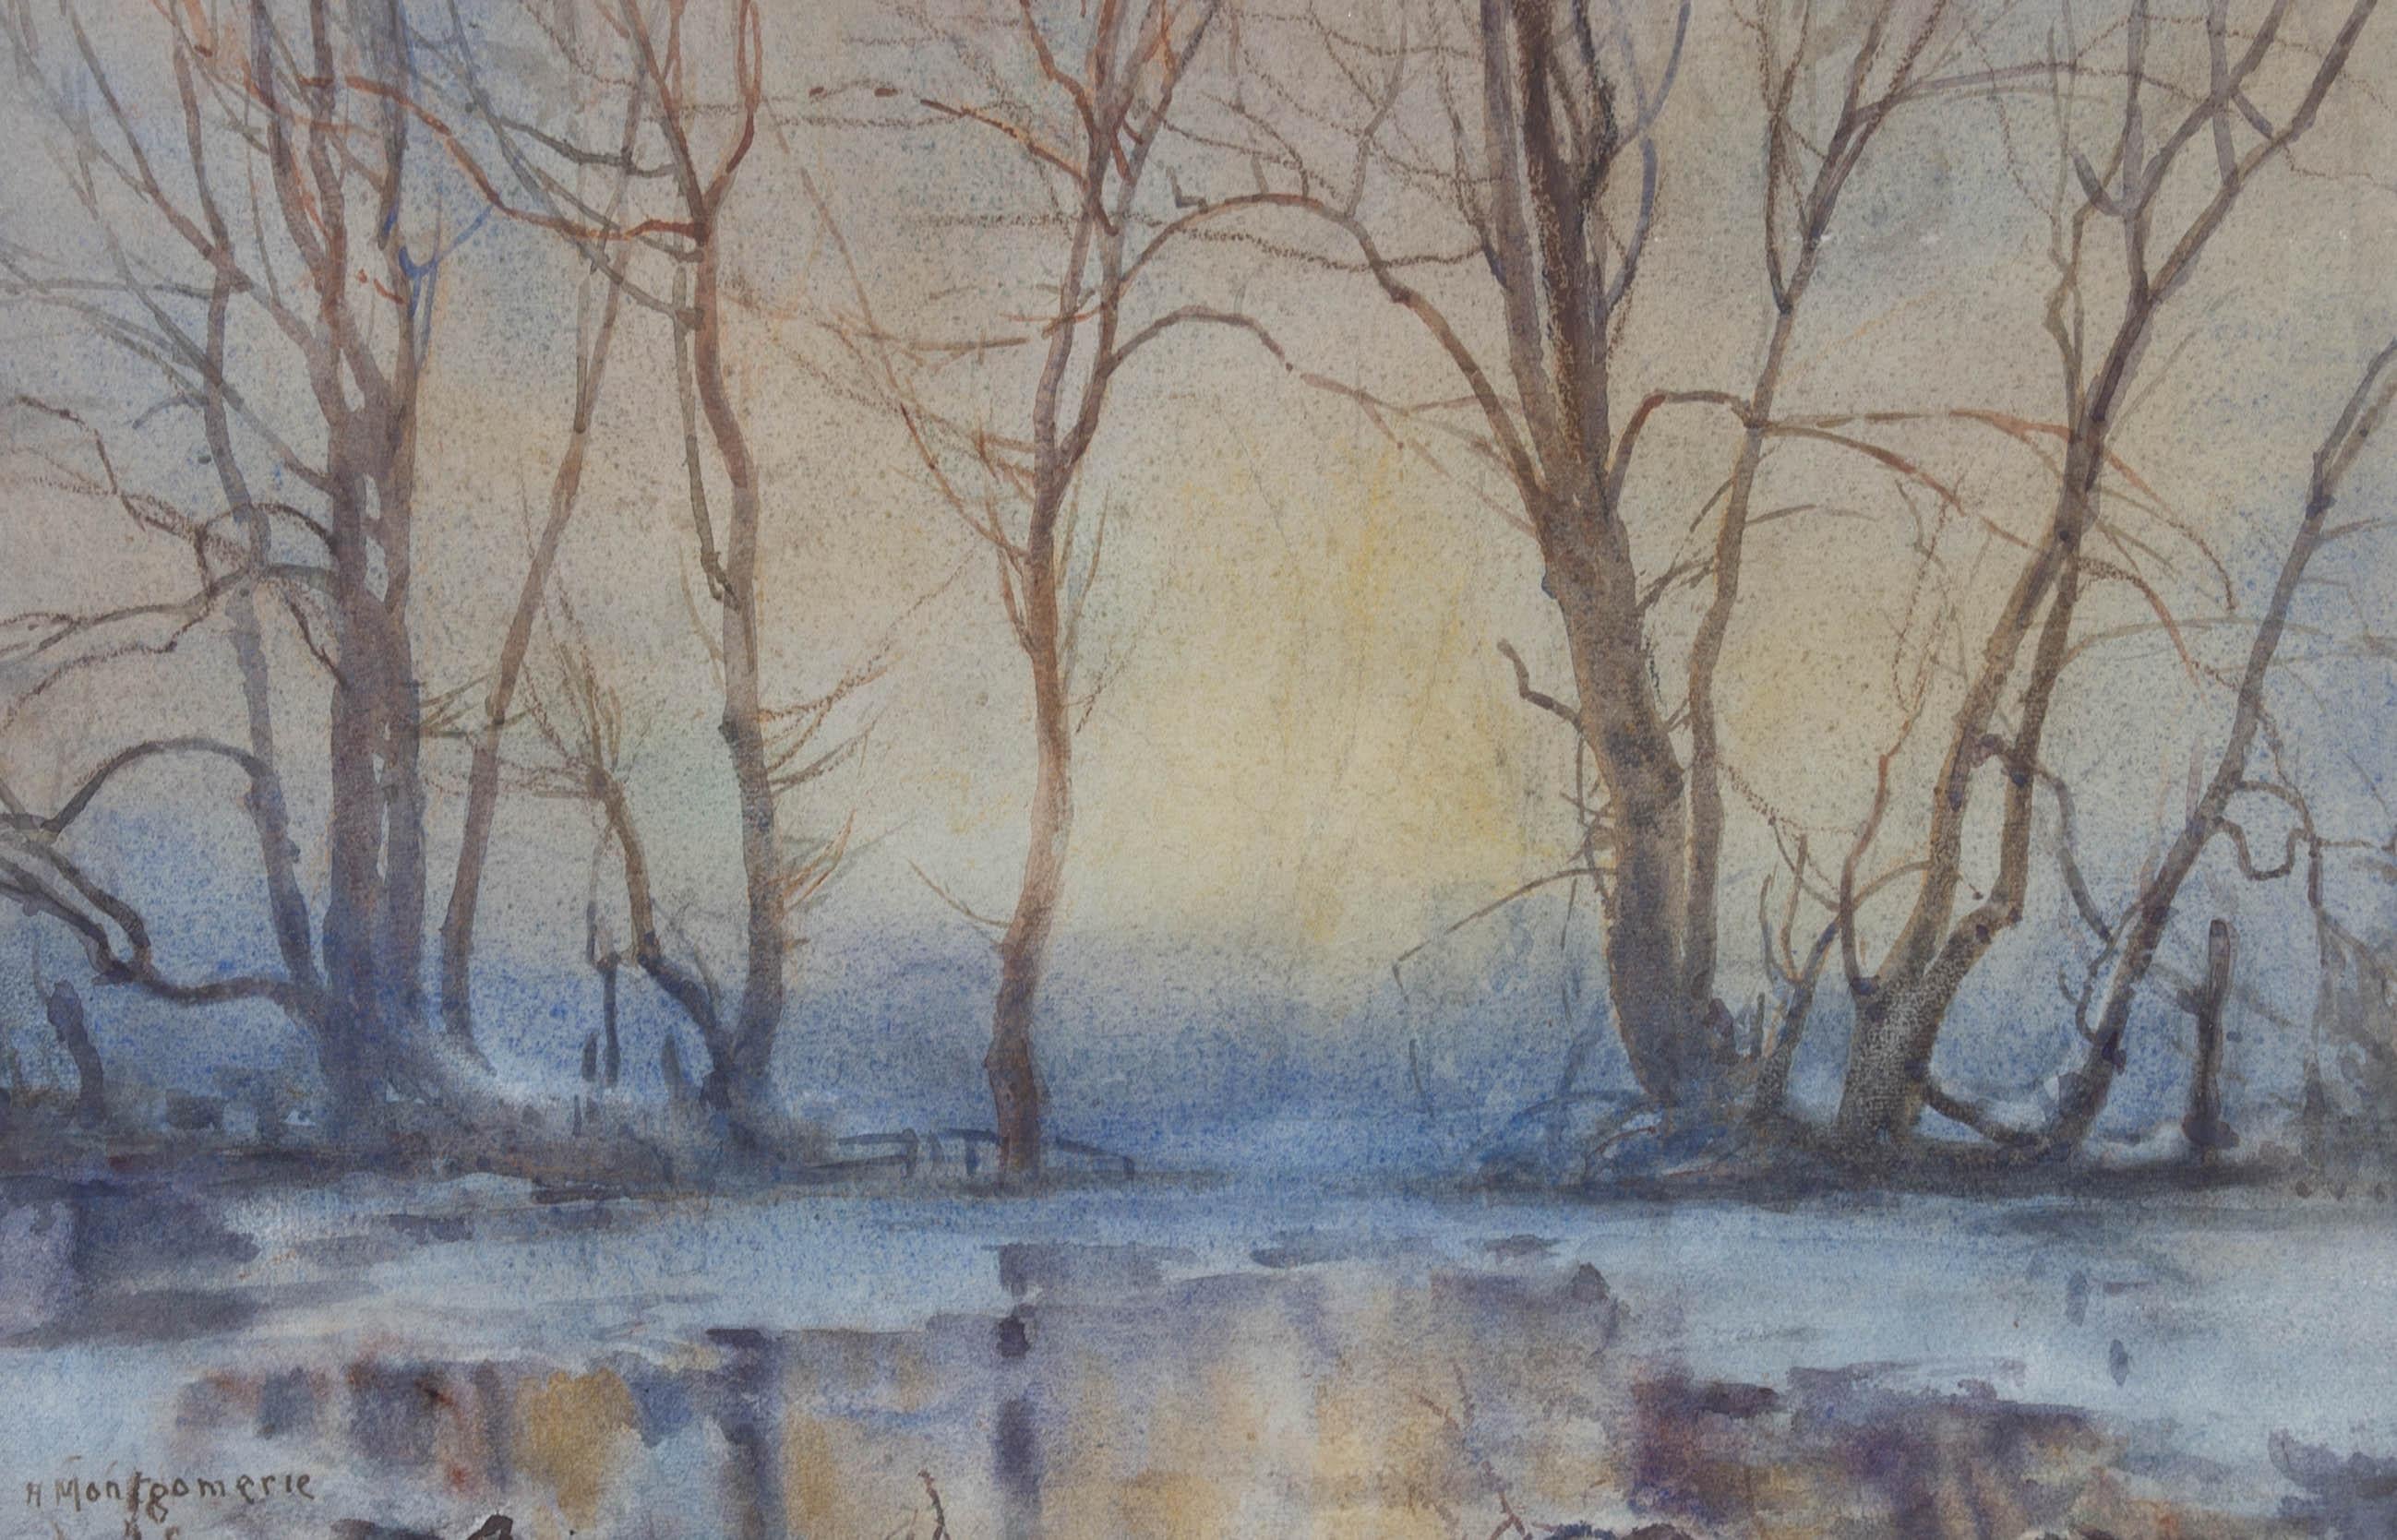 H. Montgomerie - Early 20th Century Watercolour, The Frozen Creek For Sale 1